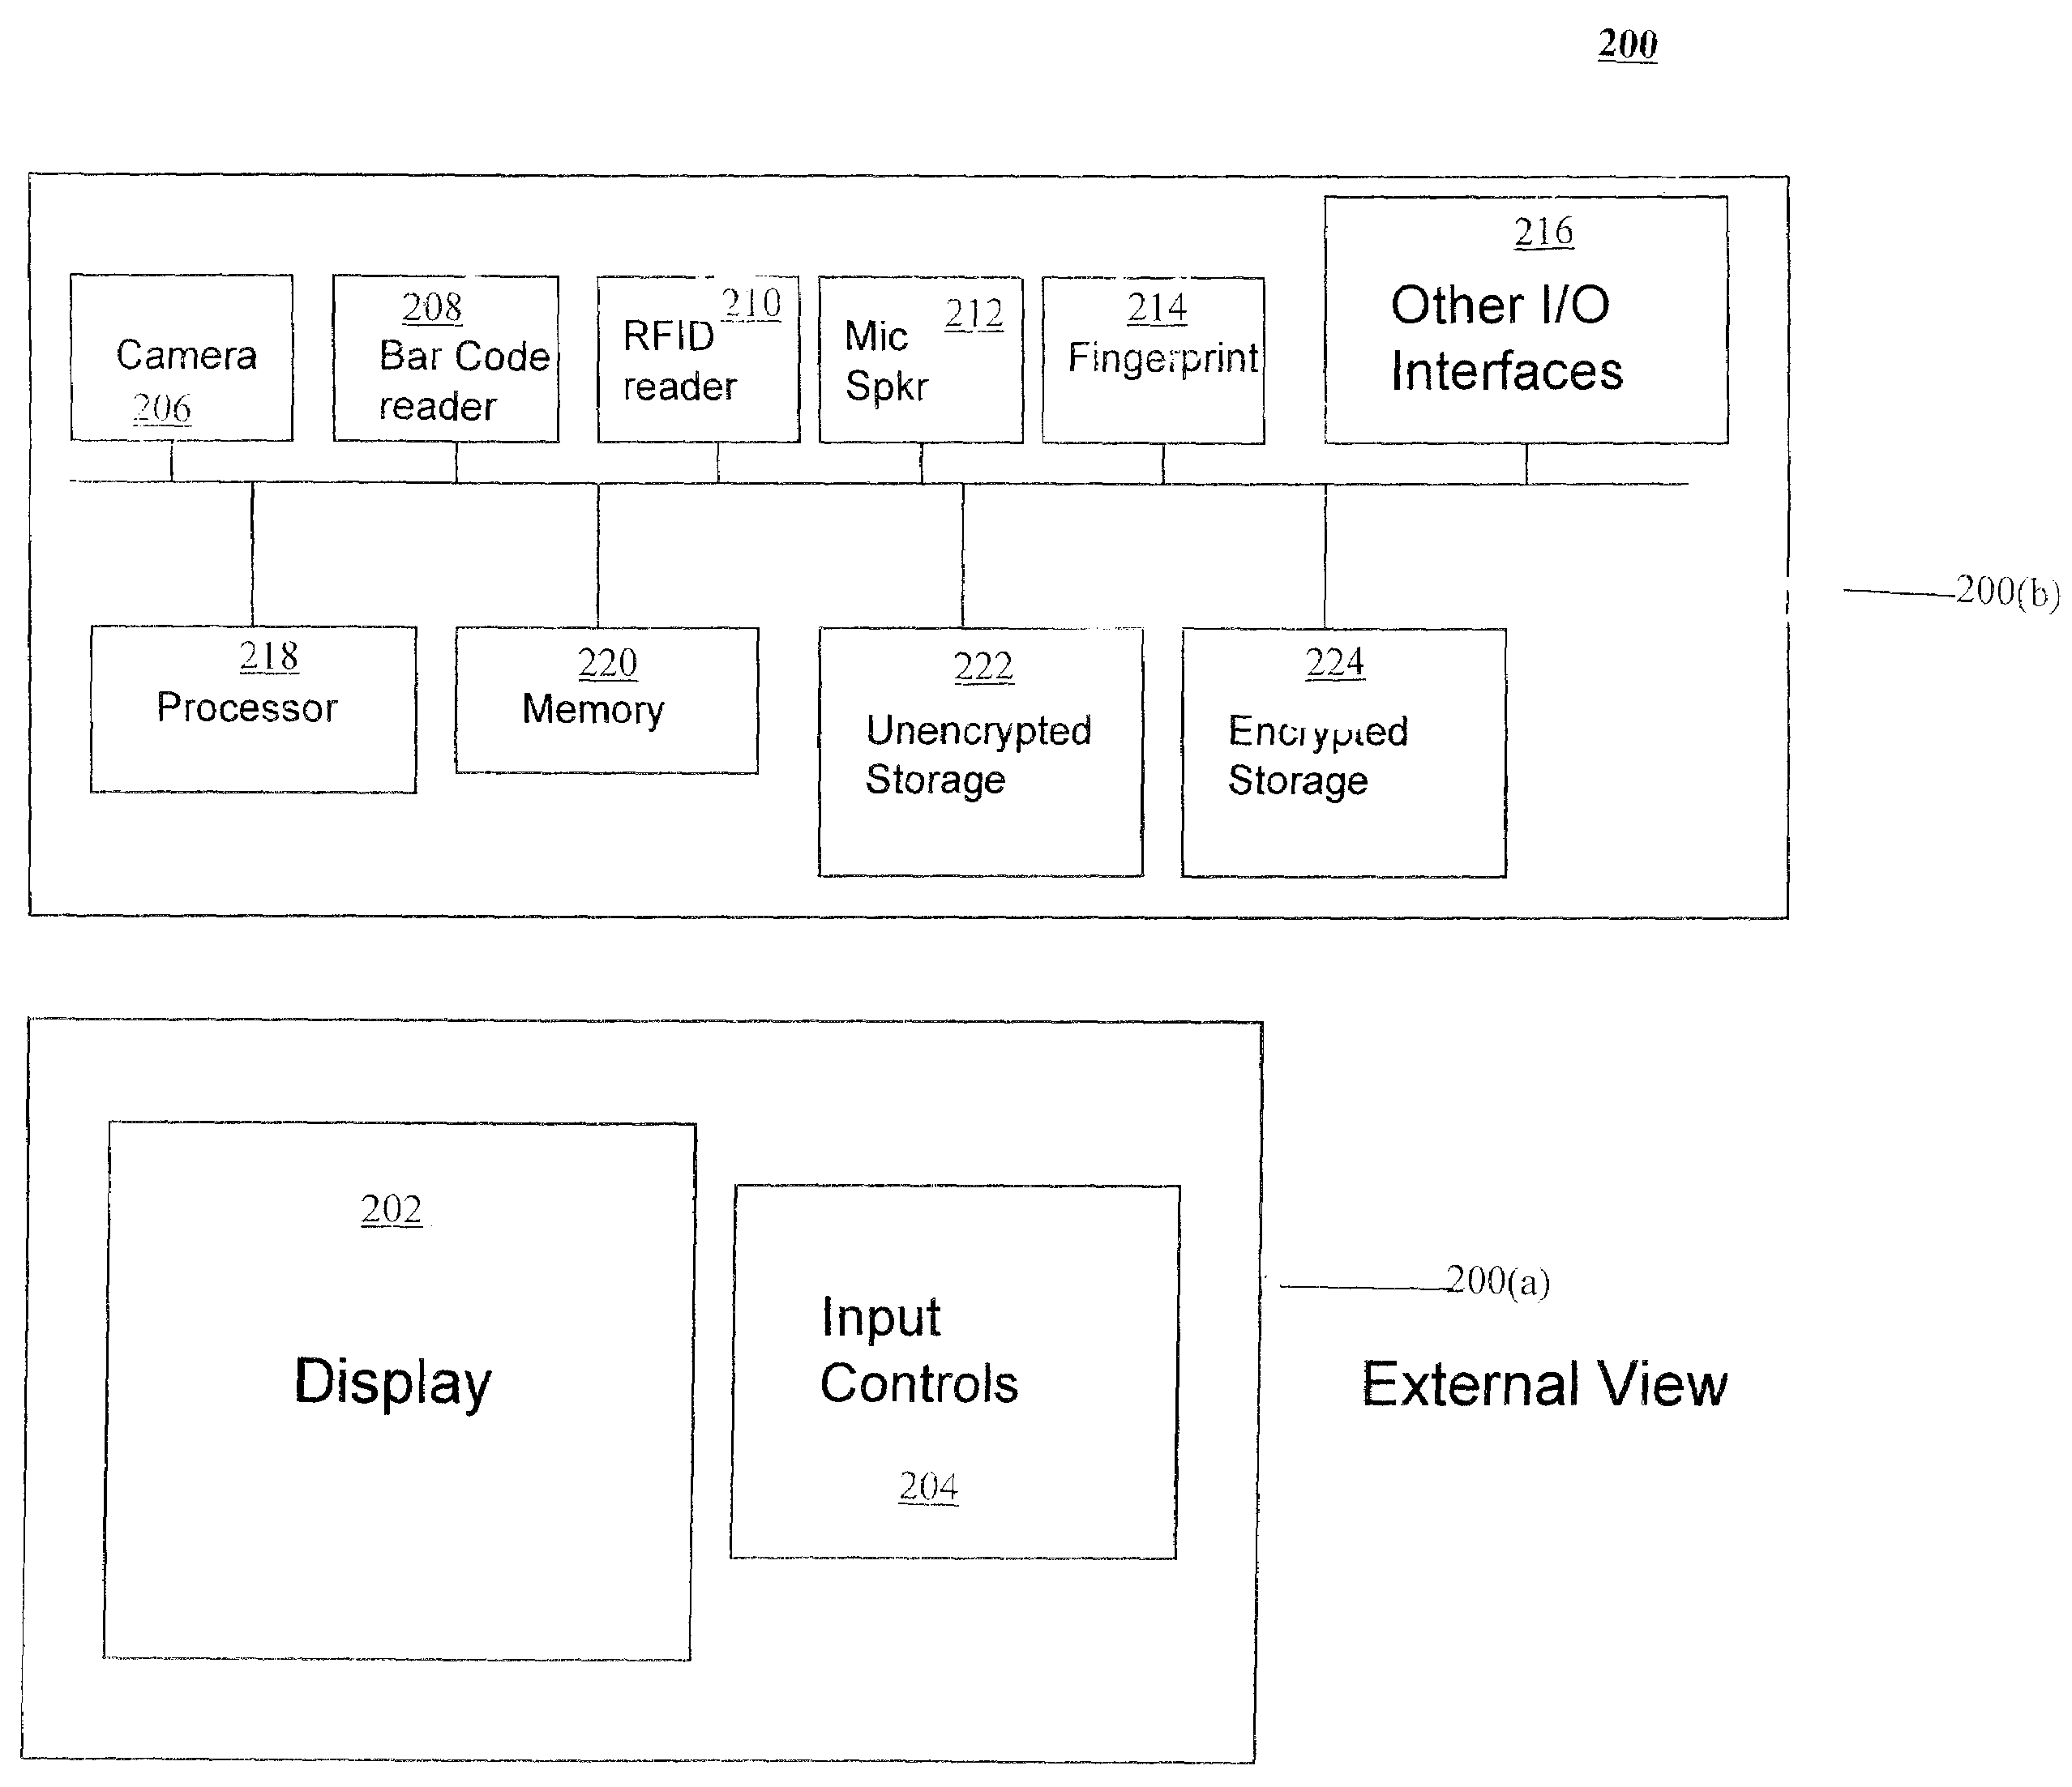 Method of creating password schemes for devices